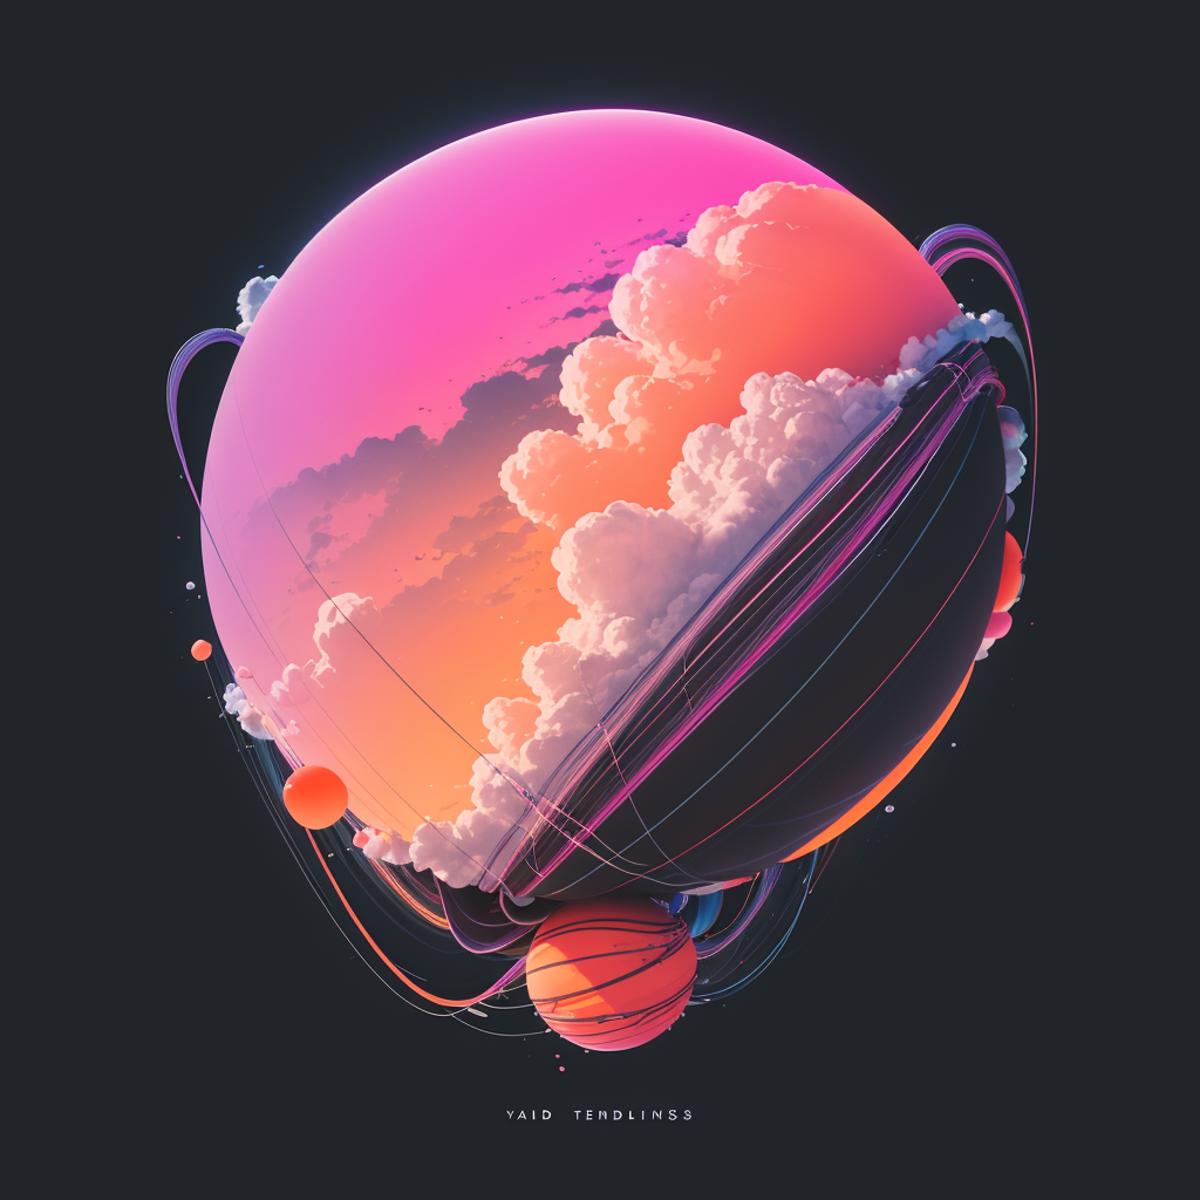 A Pink, Orange, and Purple Artistic Space Scene with Clouds and Planets